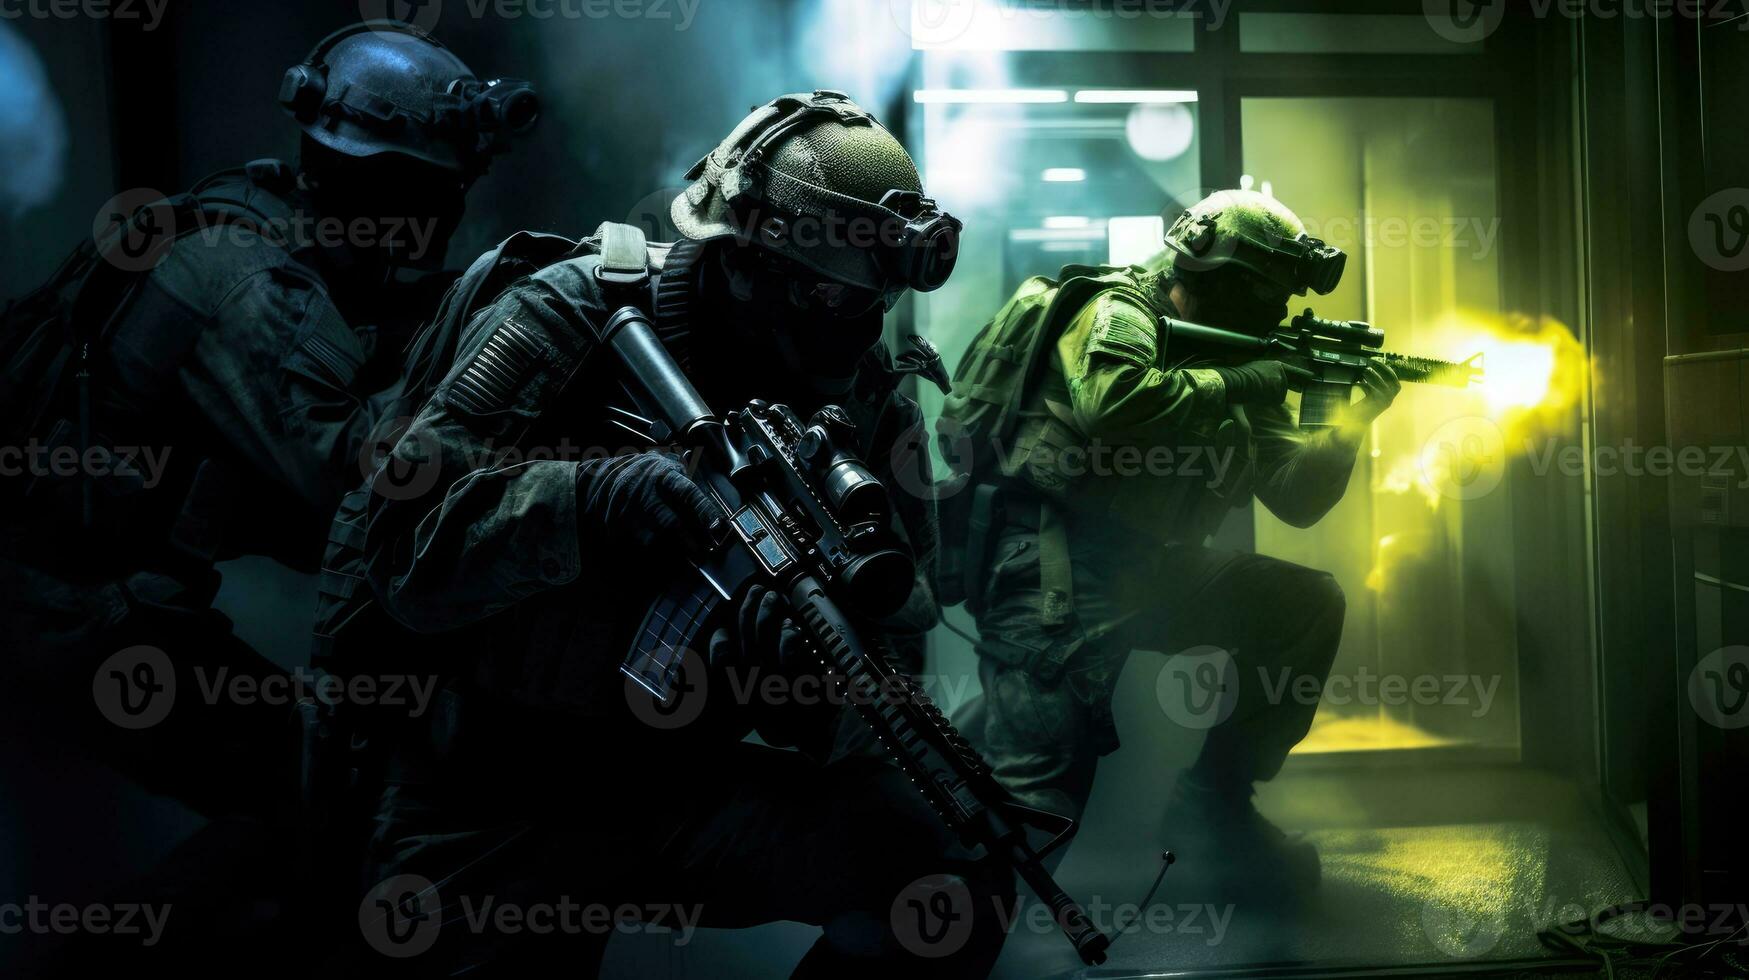 A military special forces team infiltrating a high-security facility, using night vision goggles and suppressed firearms photo